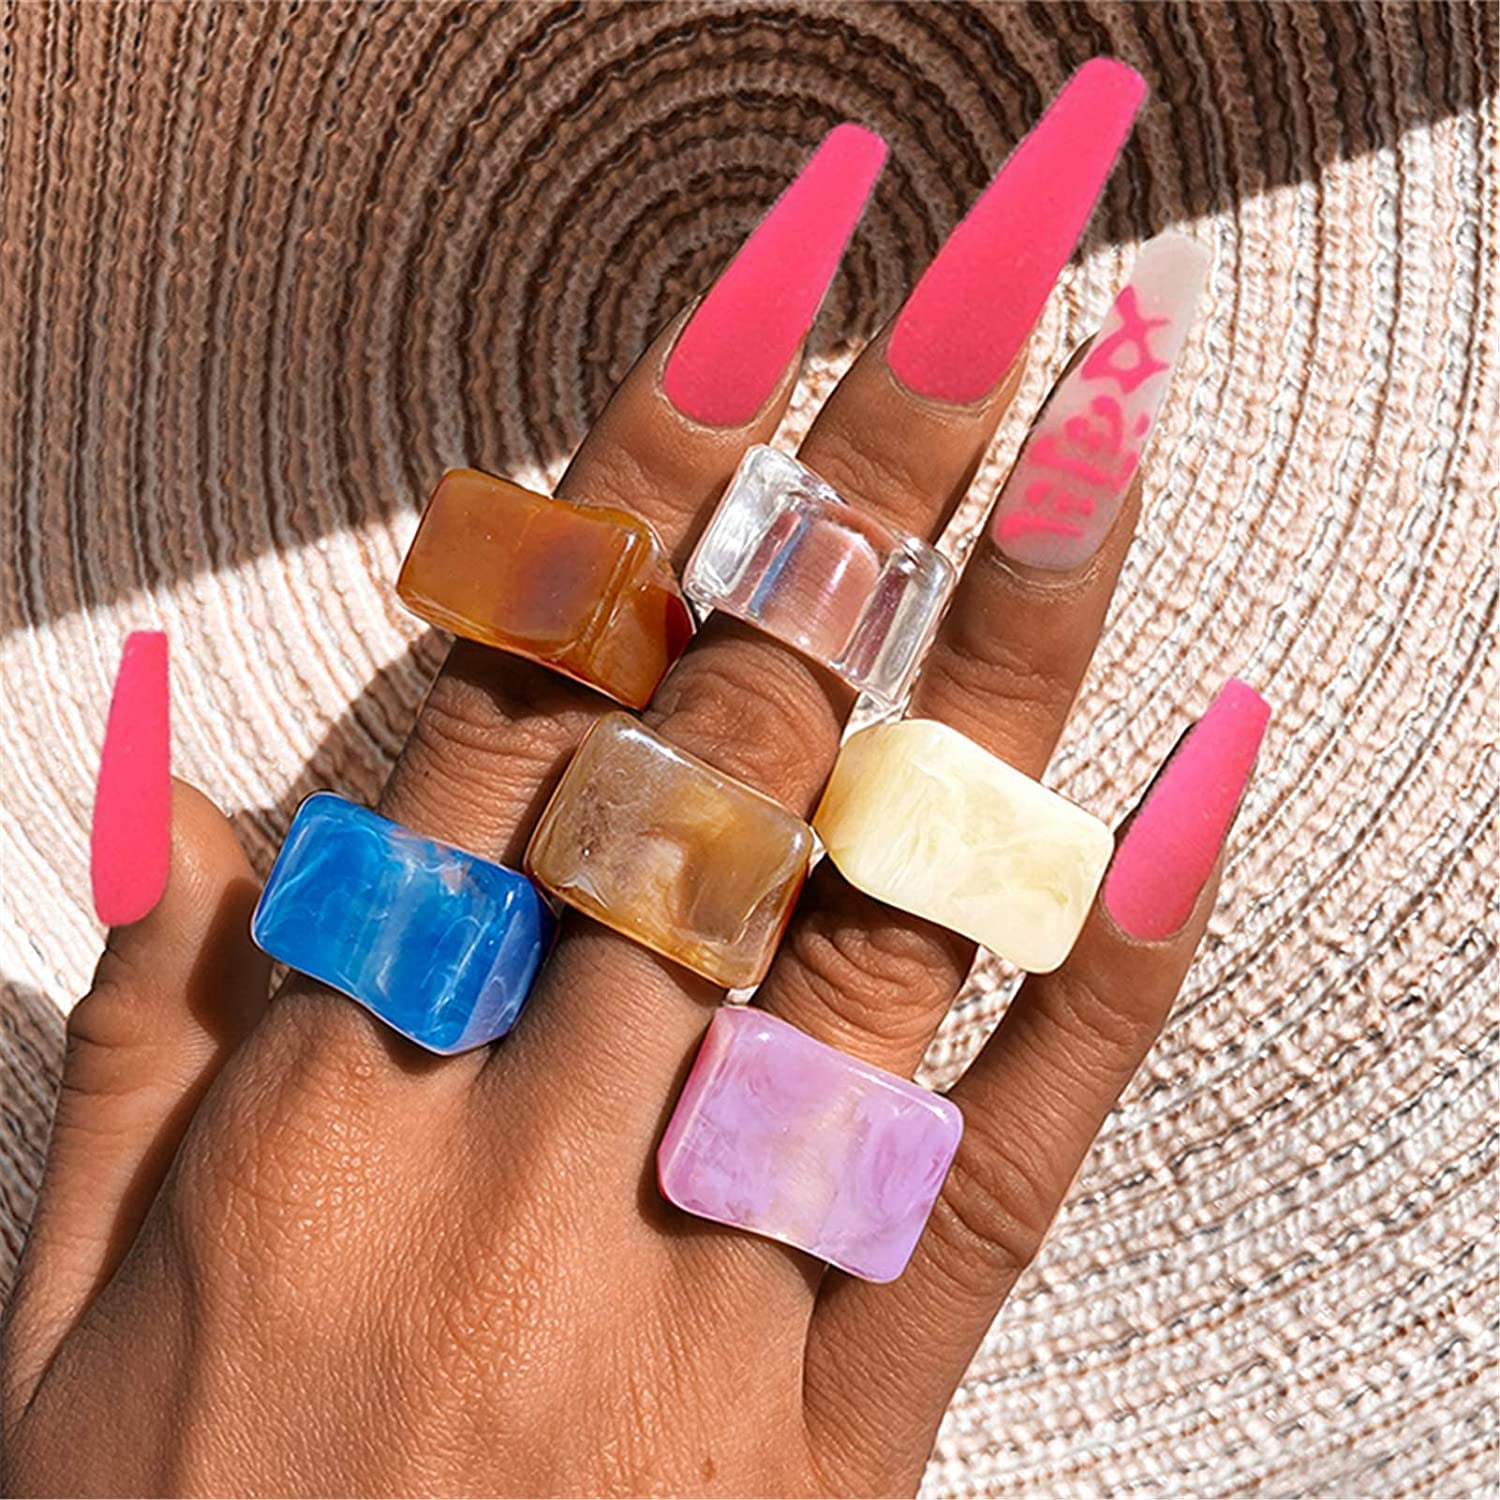  Acrylic Resin Rings Cute Trendy Rings Colorful Rings Plastic  Resin Stackable Chunky Ring set for Women Girls: Clothing, Shoes & Jewelry